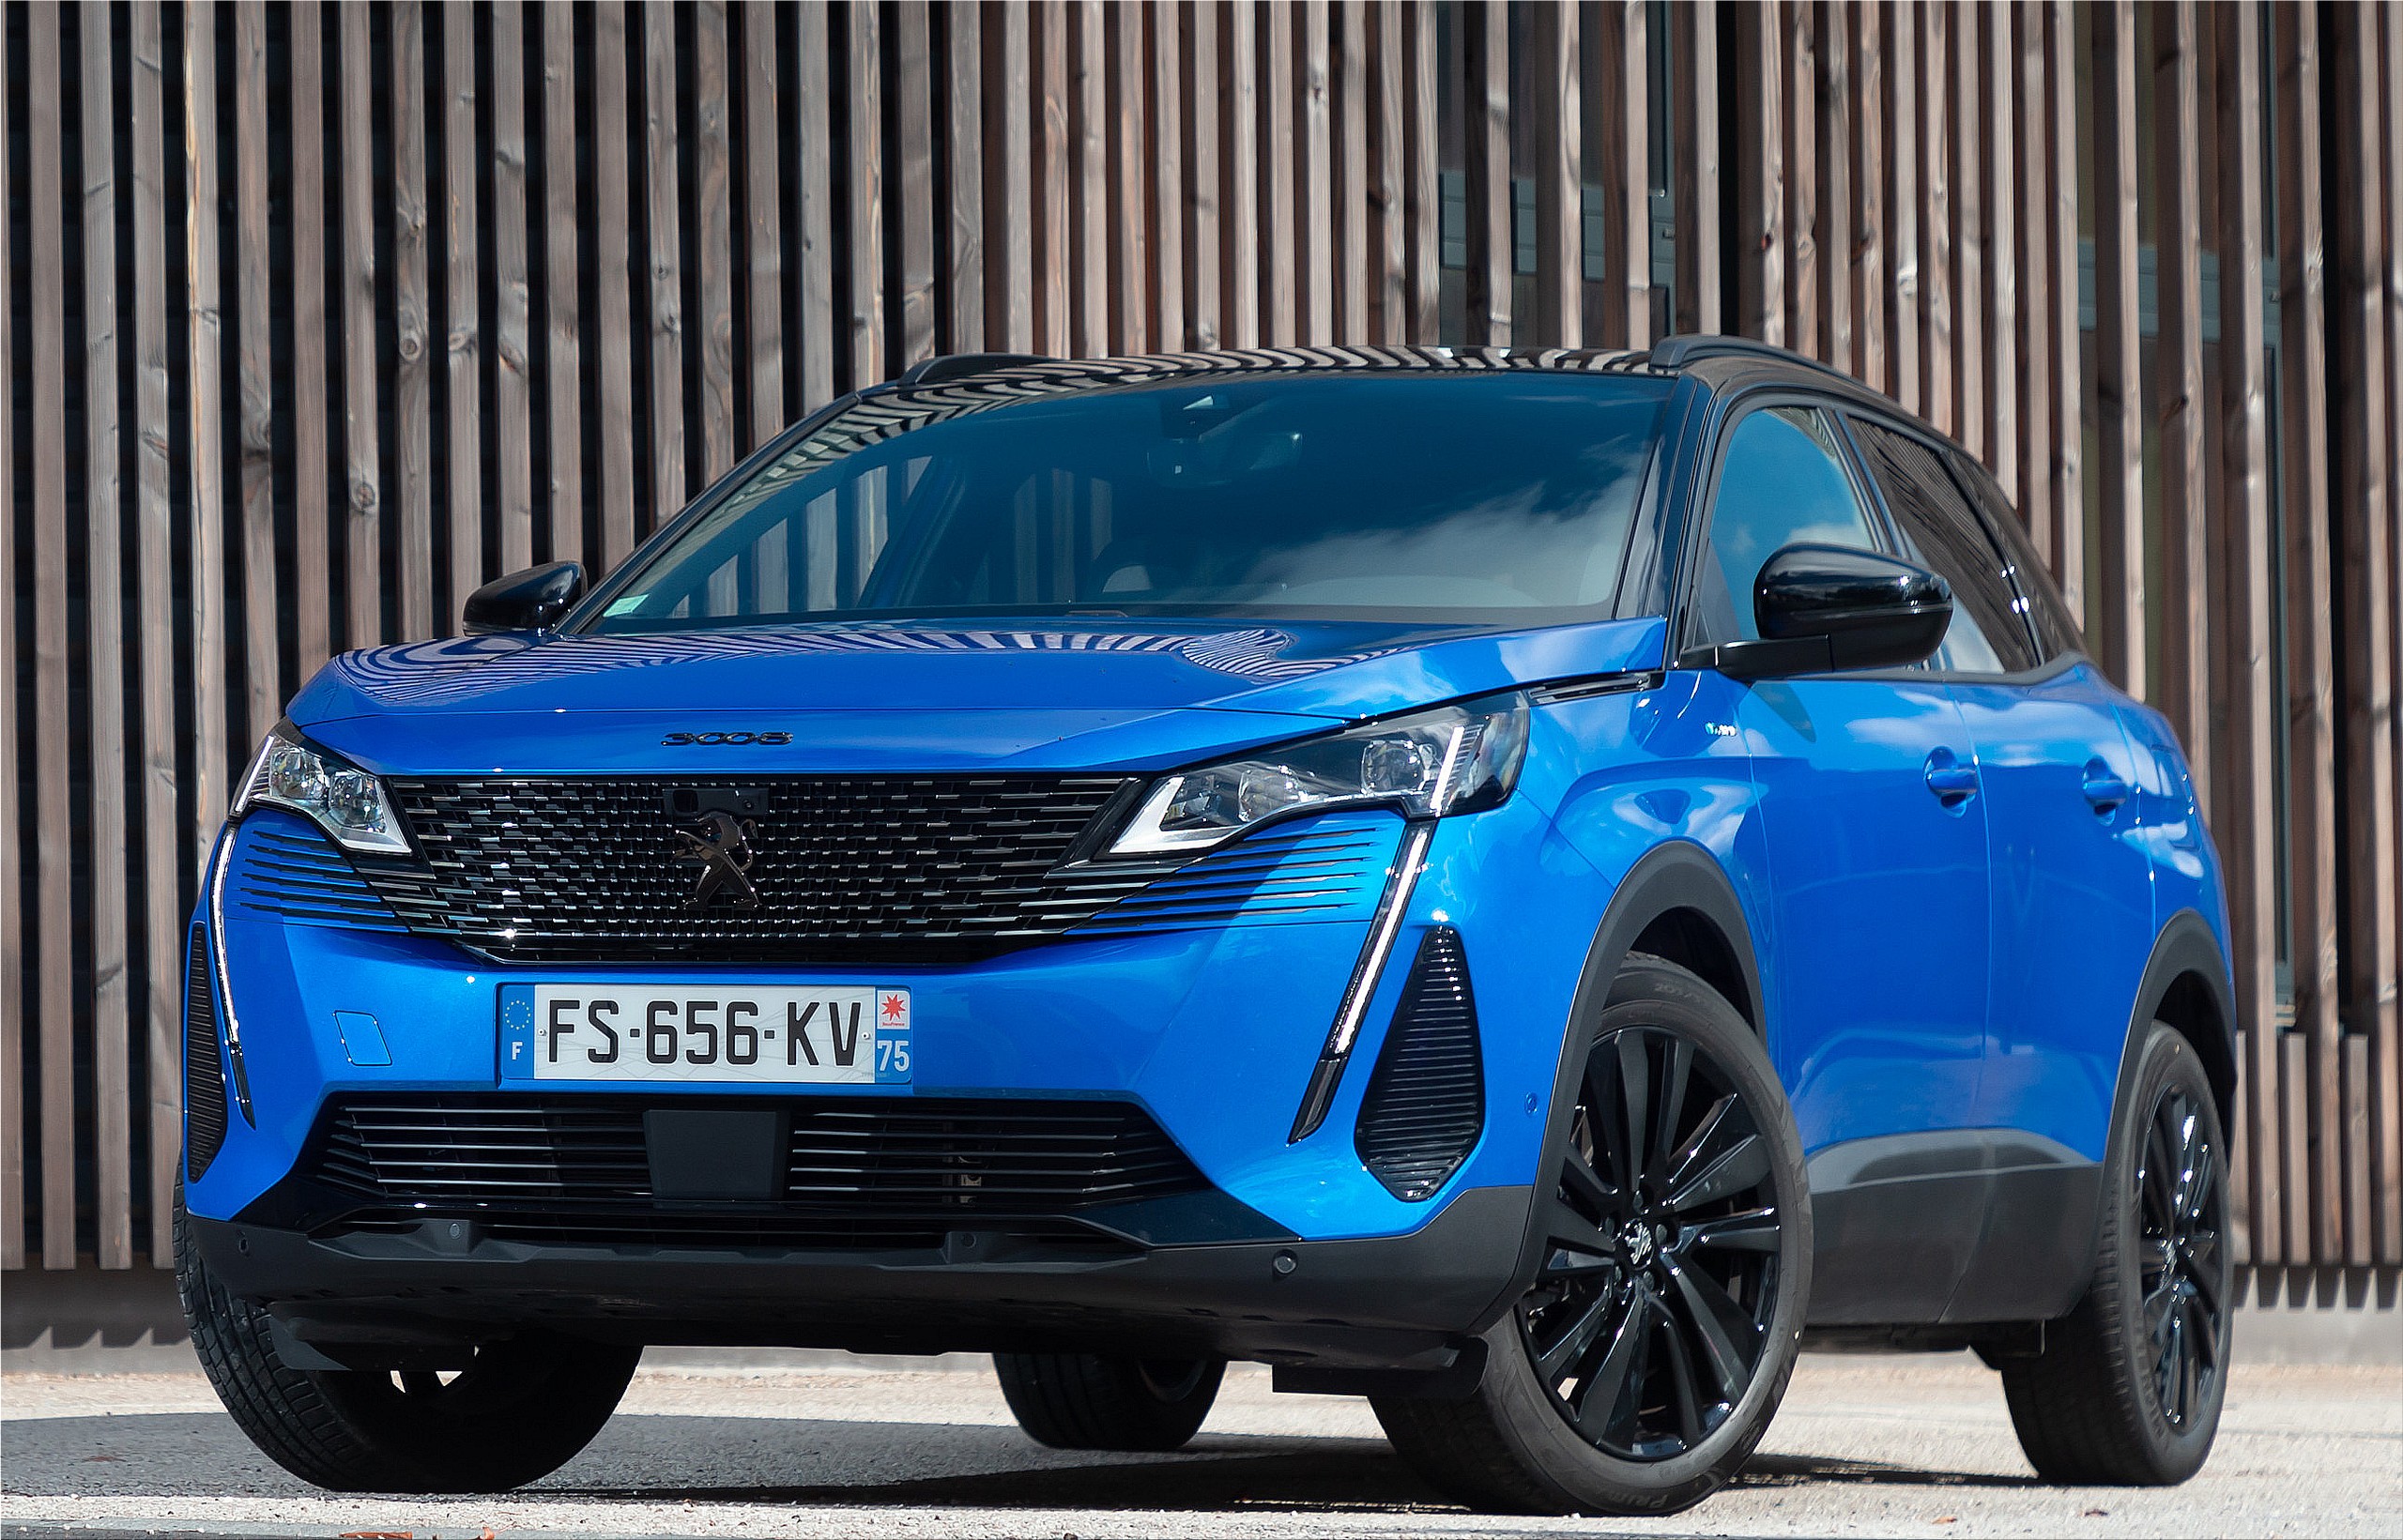 The new Peugeot 3008 generation will use the eVMP platform